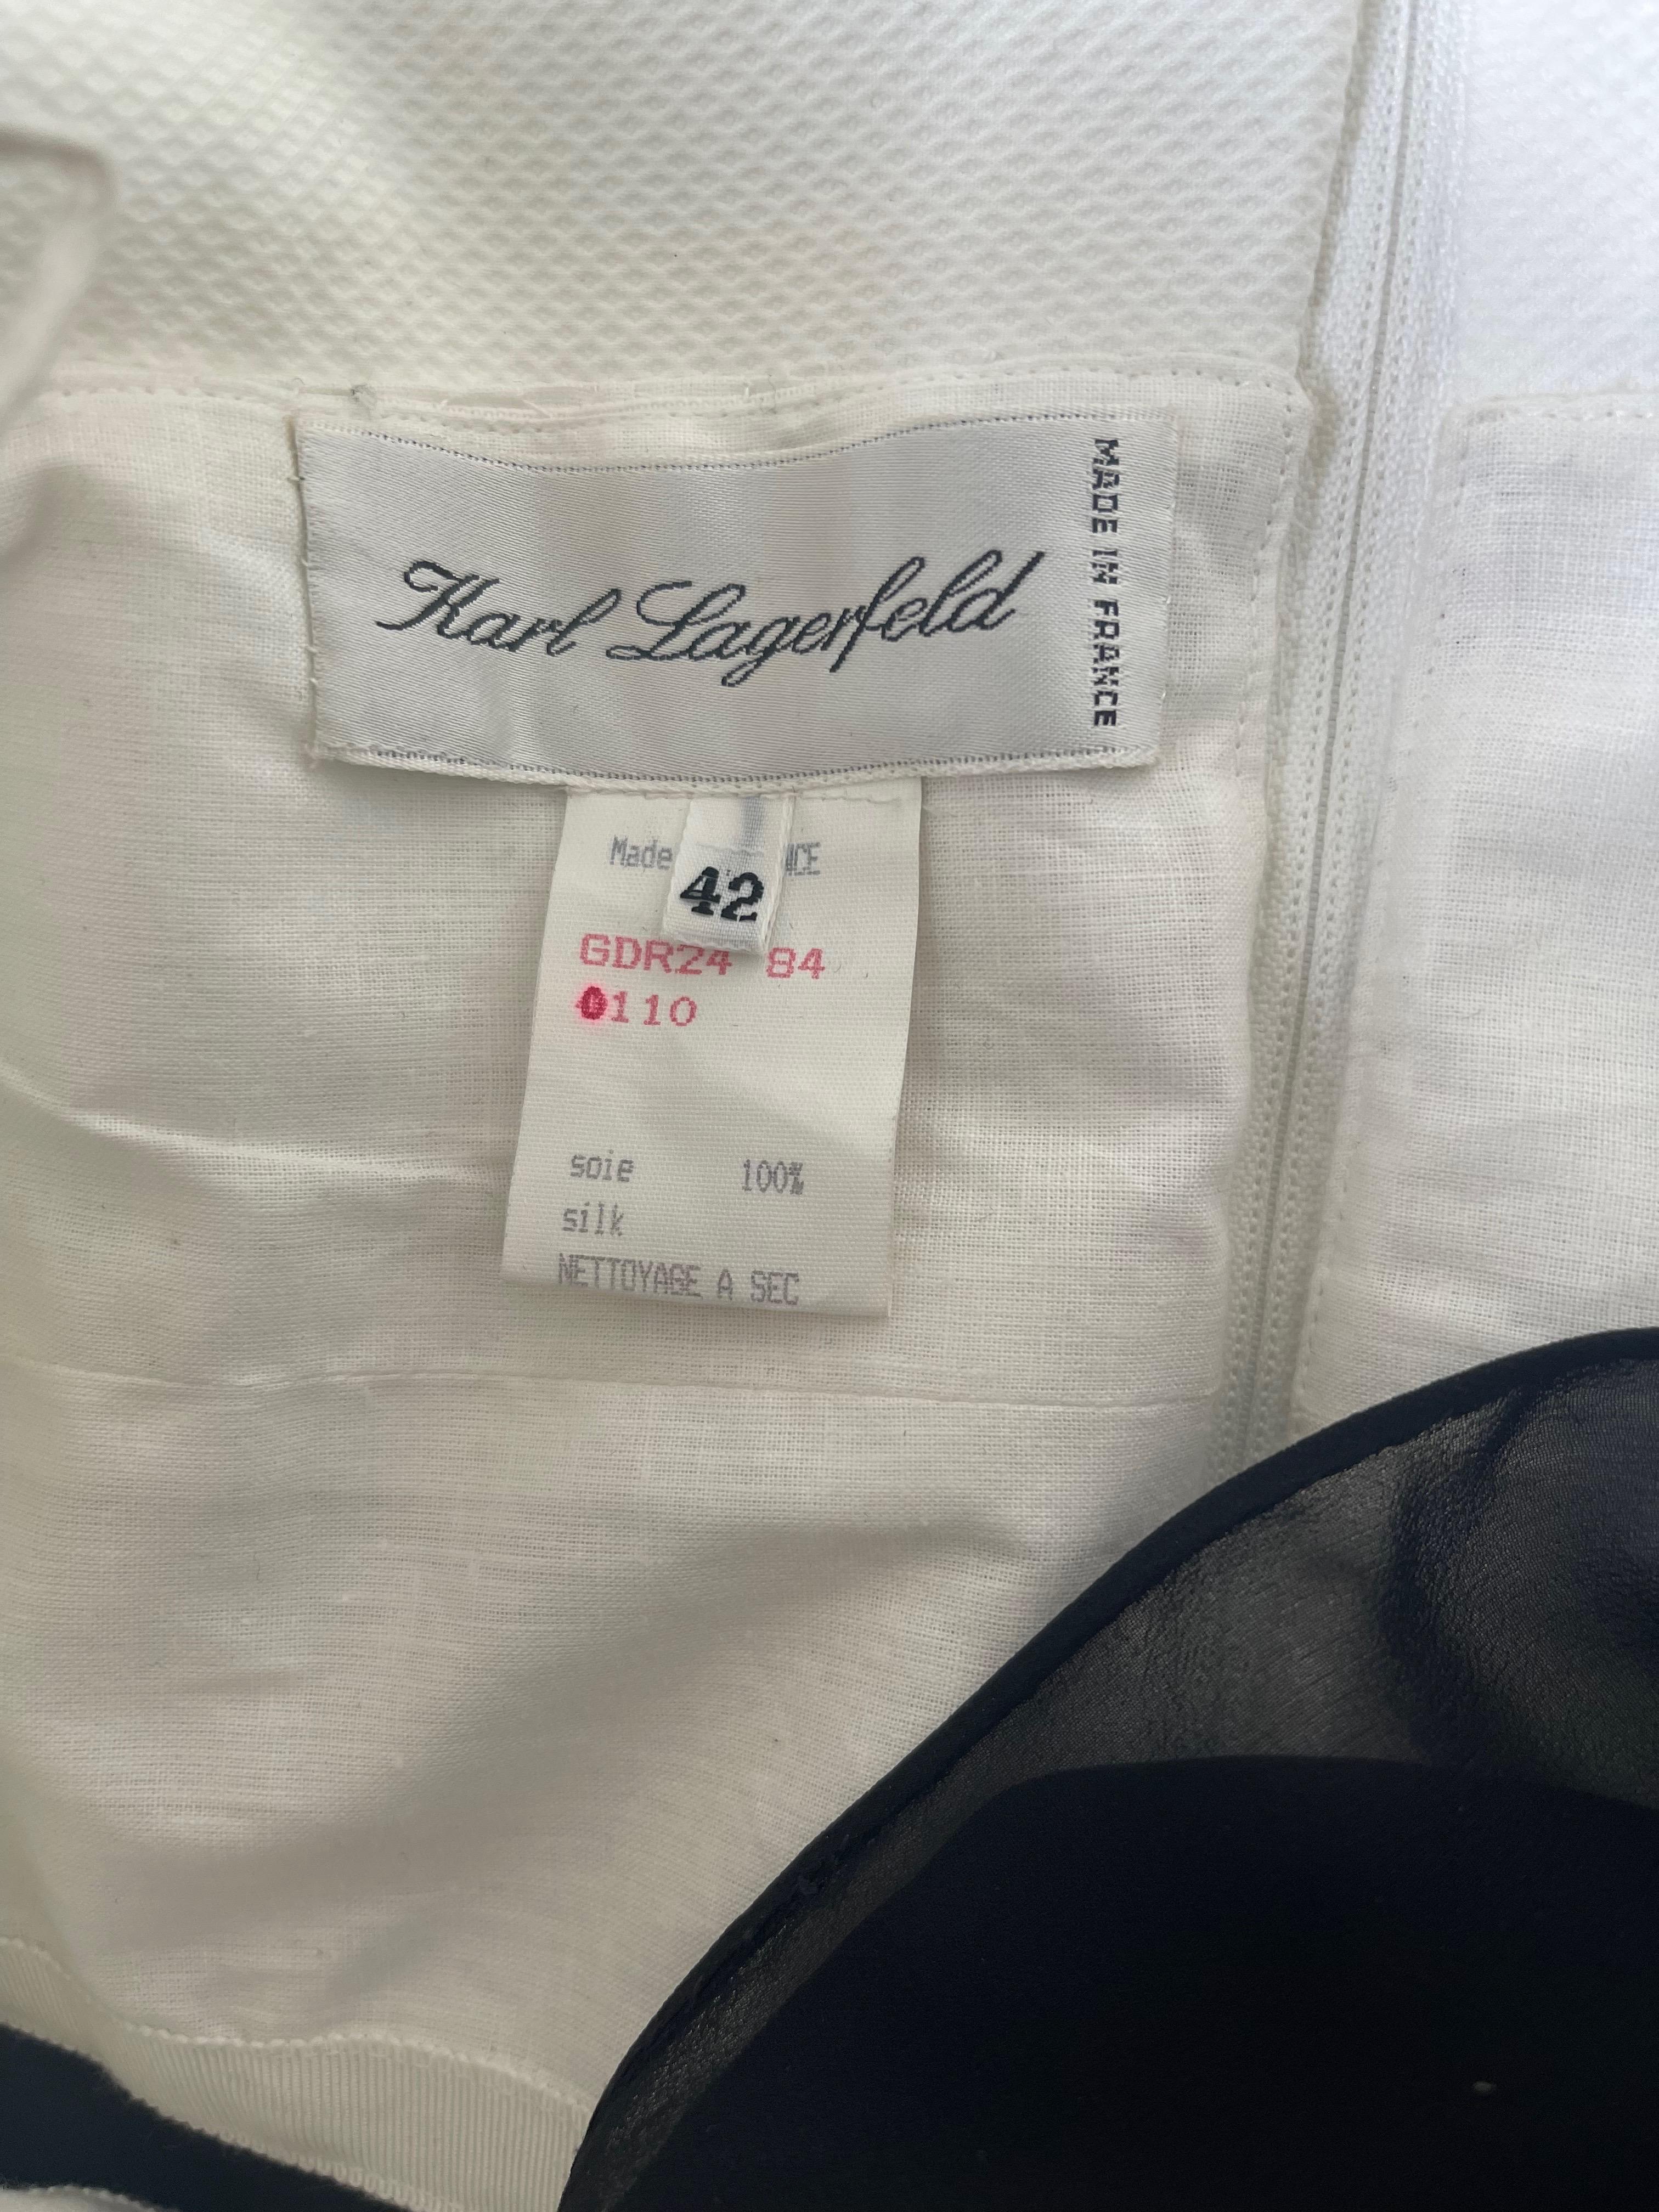 Karl Lagerfeld 1990s Size 42 / 8 Black and White Silk Chiffon Vintage 90s Dress In Excellent Condition For Sale In San Diego, CA